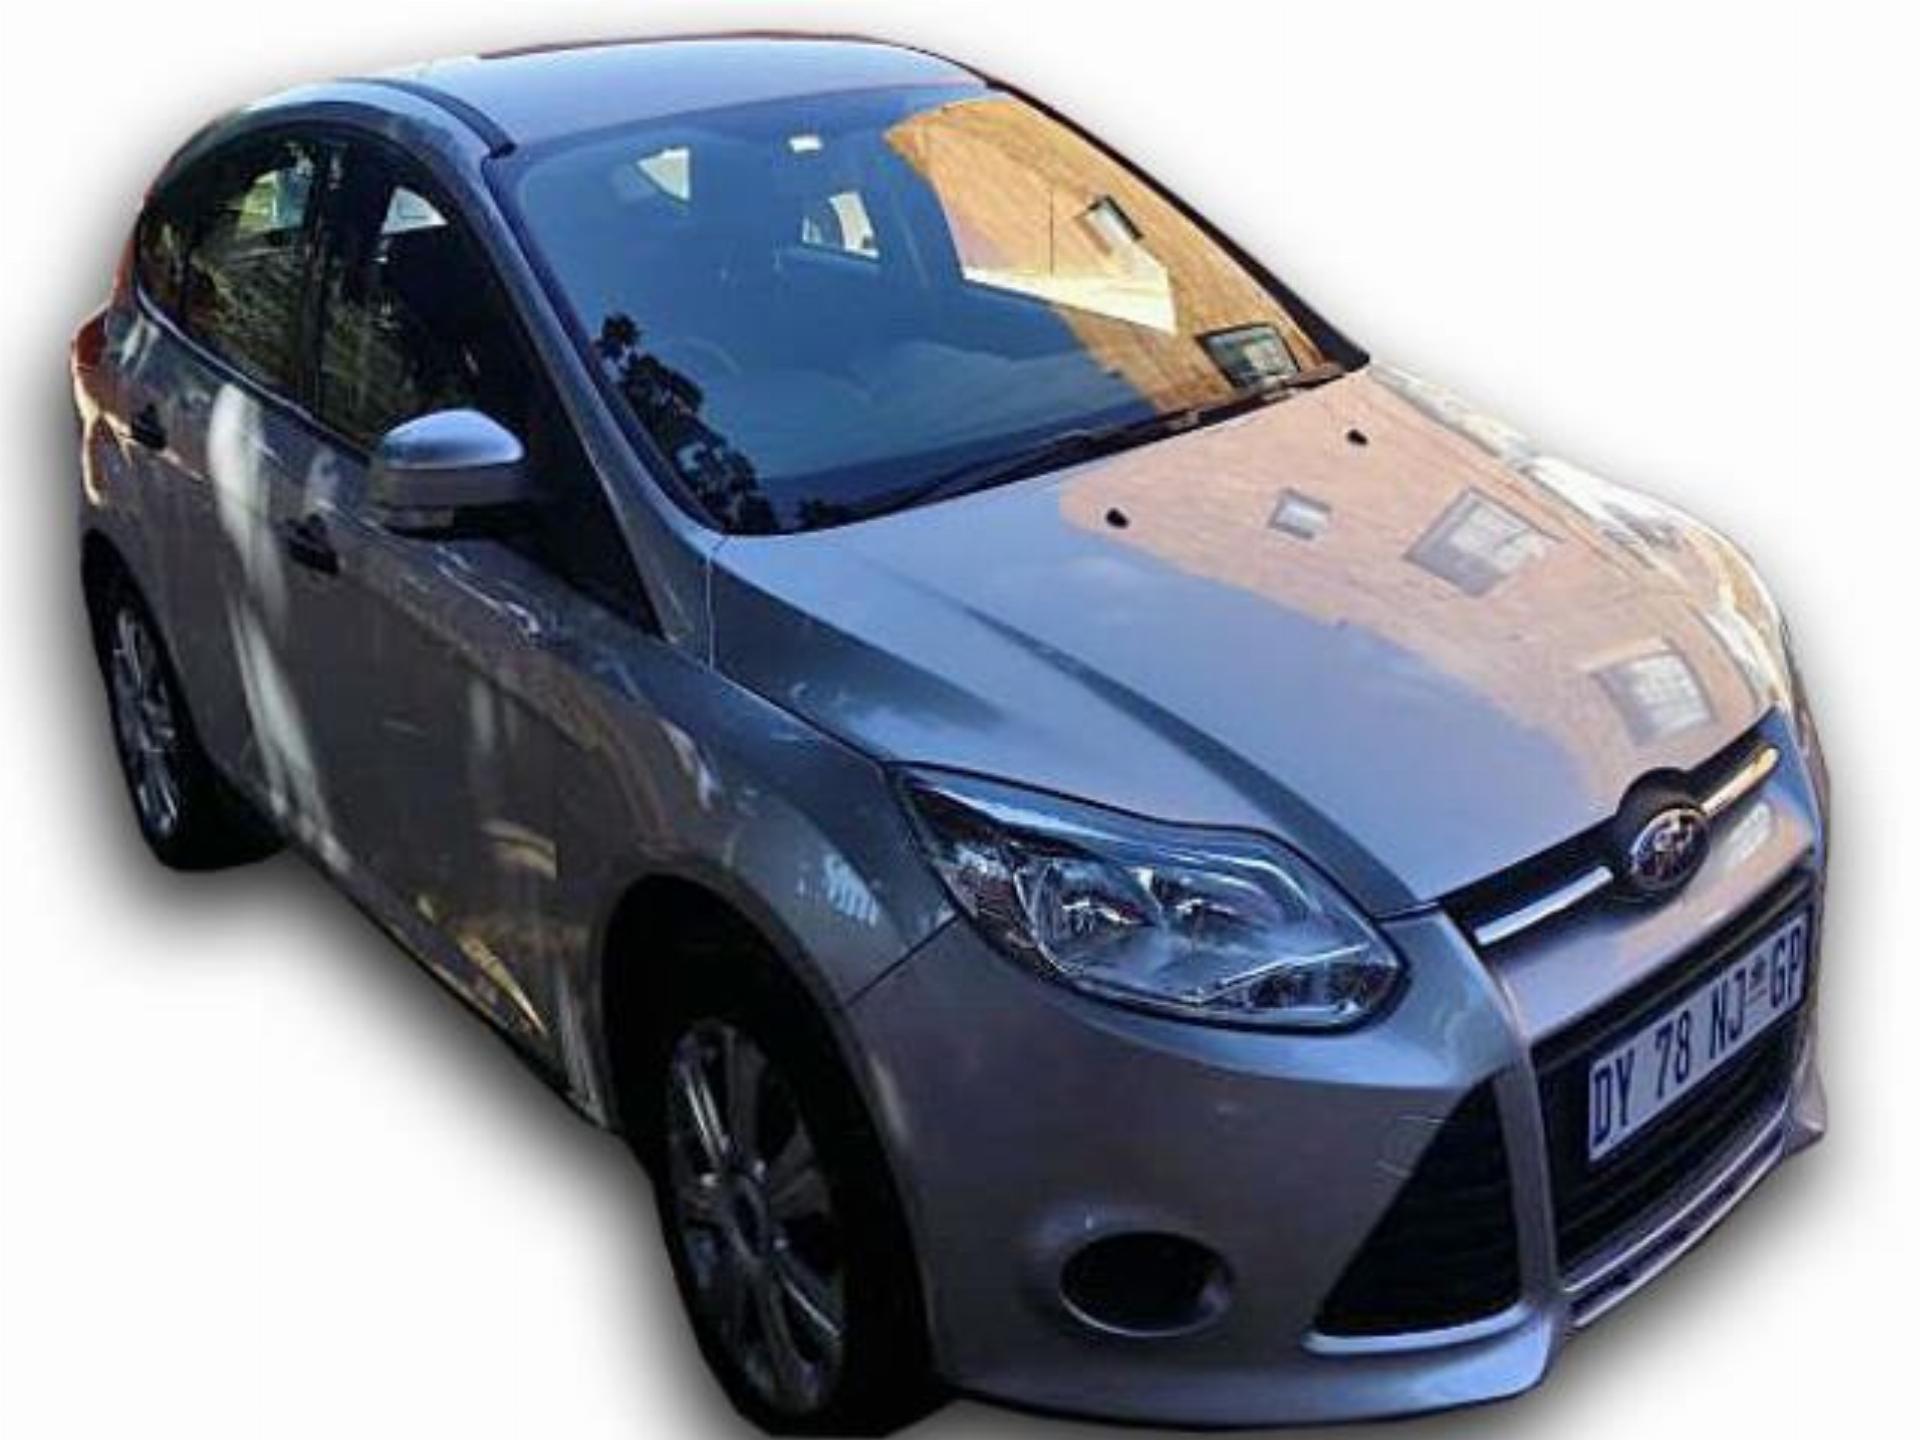 Ford Focus 1.6 TI VCT Ambiente Silver